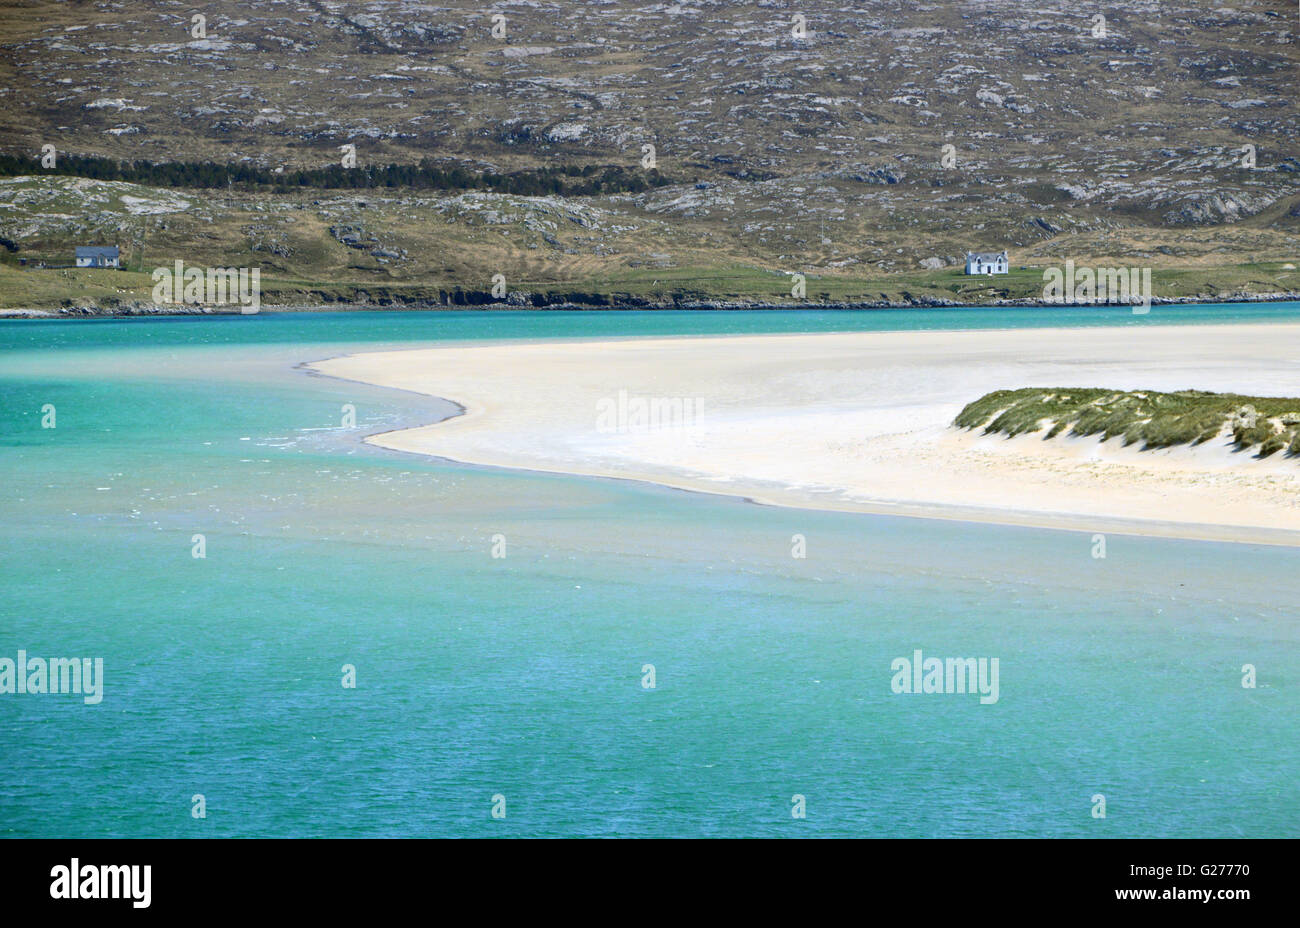 Traigh Losgaintir (Luskentyre Bay) from the A859 Road on Northwestern Coastline of South Harris, Outer Hebrides. Stock Photo